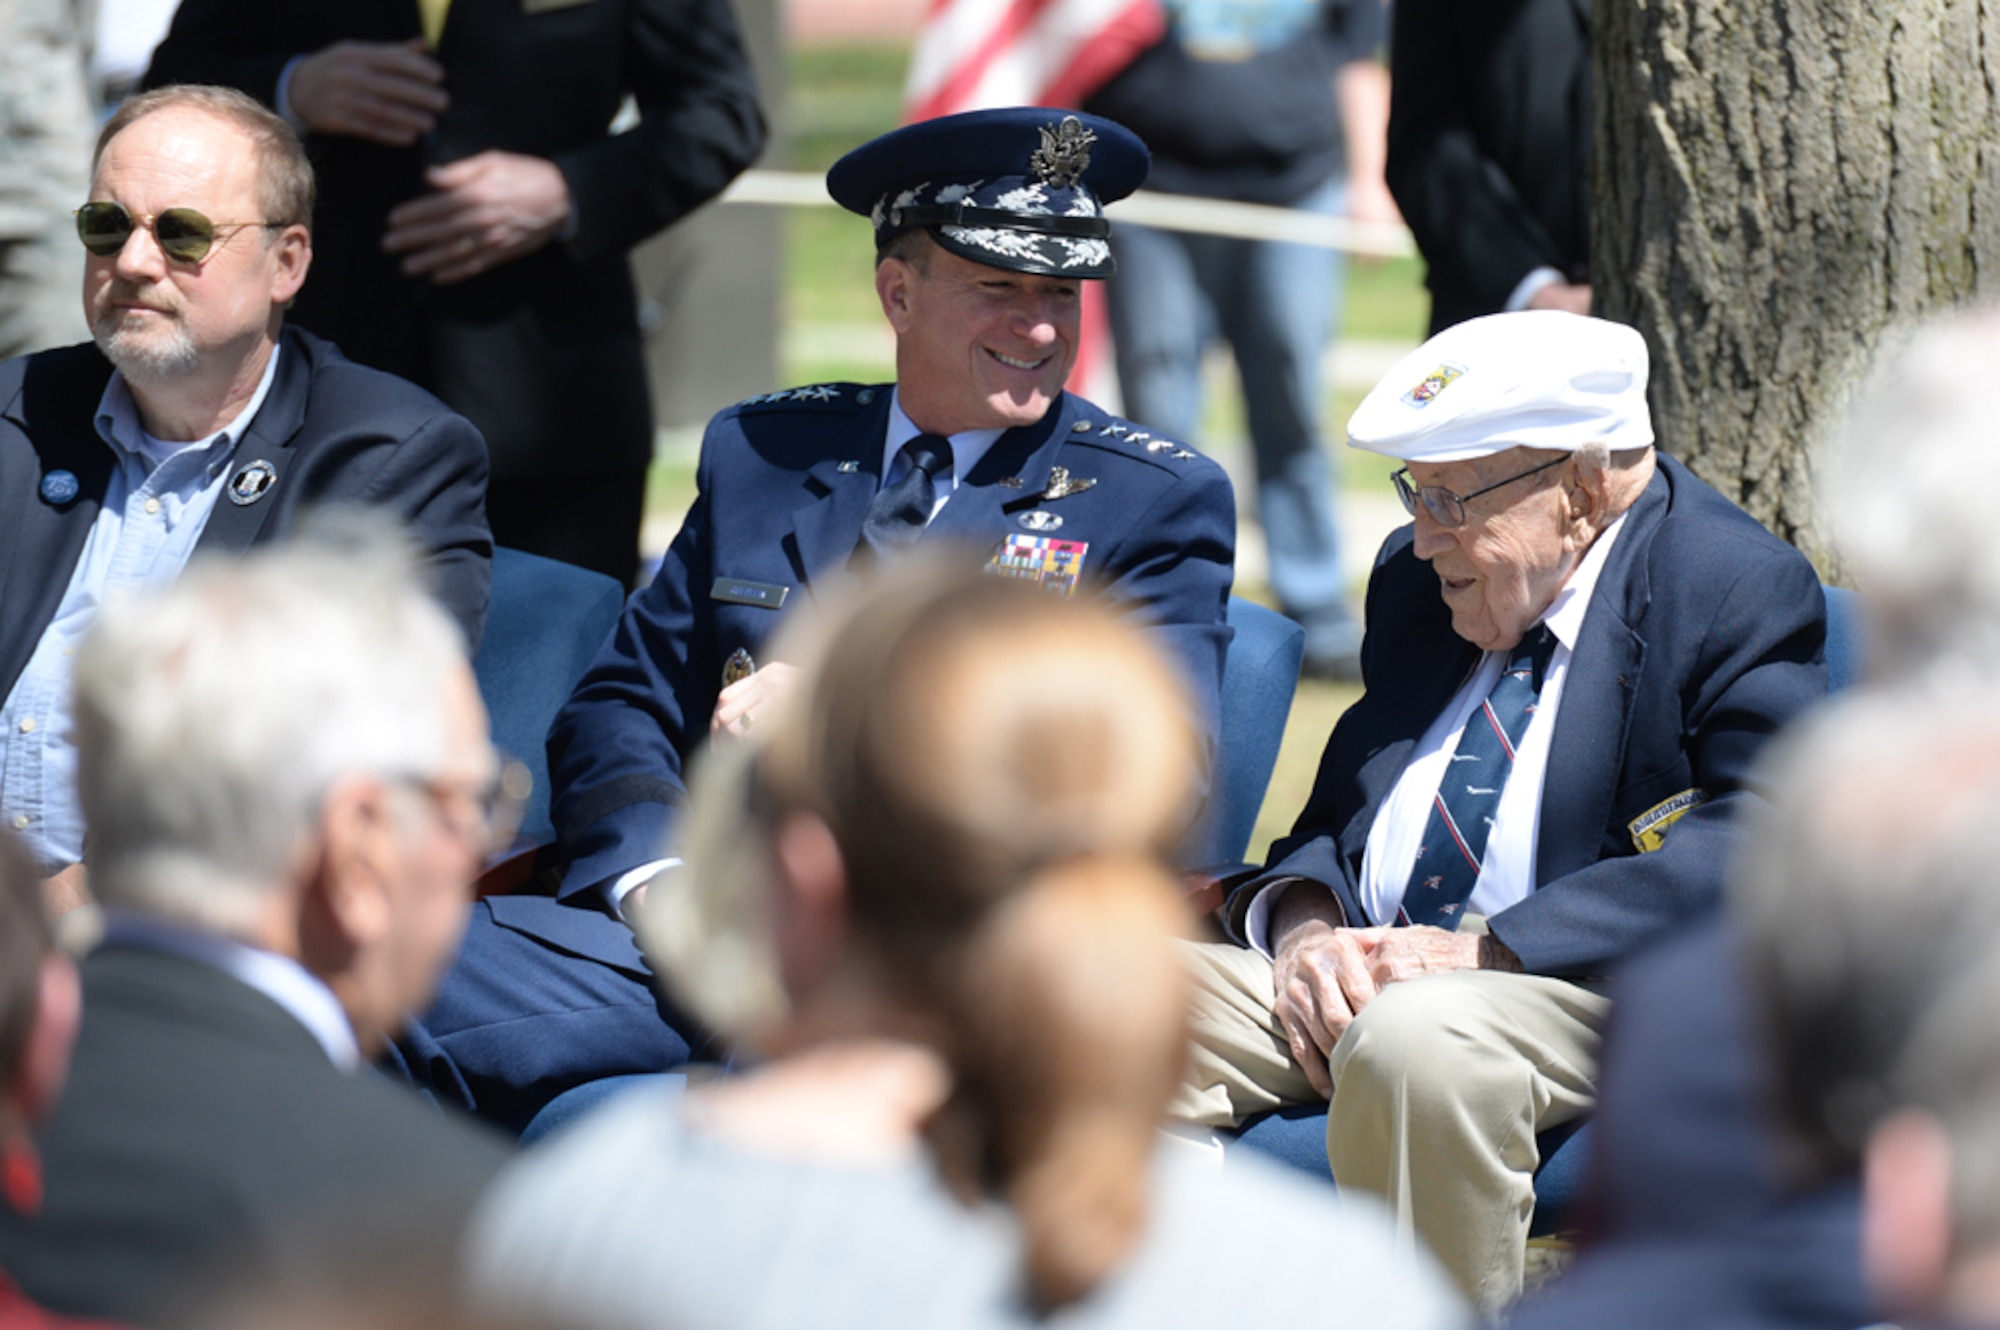 Chief of the Staff of the Air Force, Gen. David L. Goldfein, talks to Lt. Col. (Ret.) Richard E. Cole, the sole surviving member
of the Doolittle Raiders (right) during the 75th Anniversary of the
Doolittle Raid Memorial Ceremony at the National Museum of the United States Air Force, April 18, 2017. Also attending was Jeff Thatcher (left), the son of Doolittle Raider Staff Sgt. David Thatcher, who passed in June 2016. (U.S. Air Force Photo/ Wesley Farnsworth)
